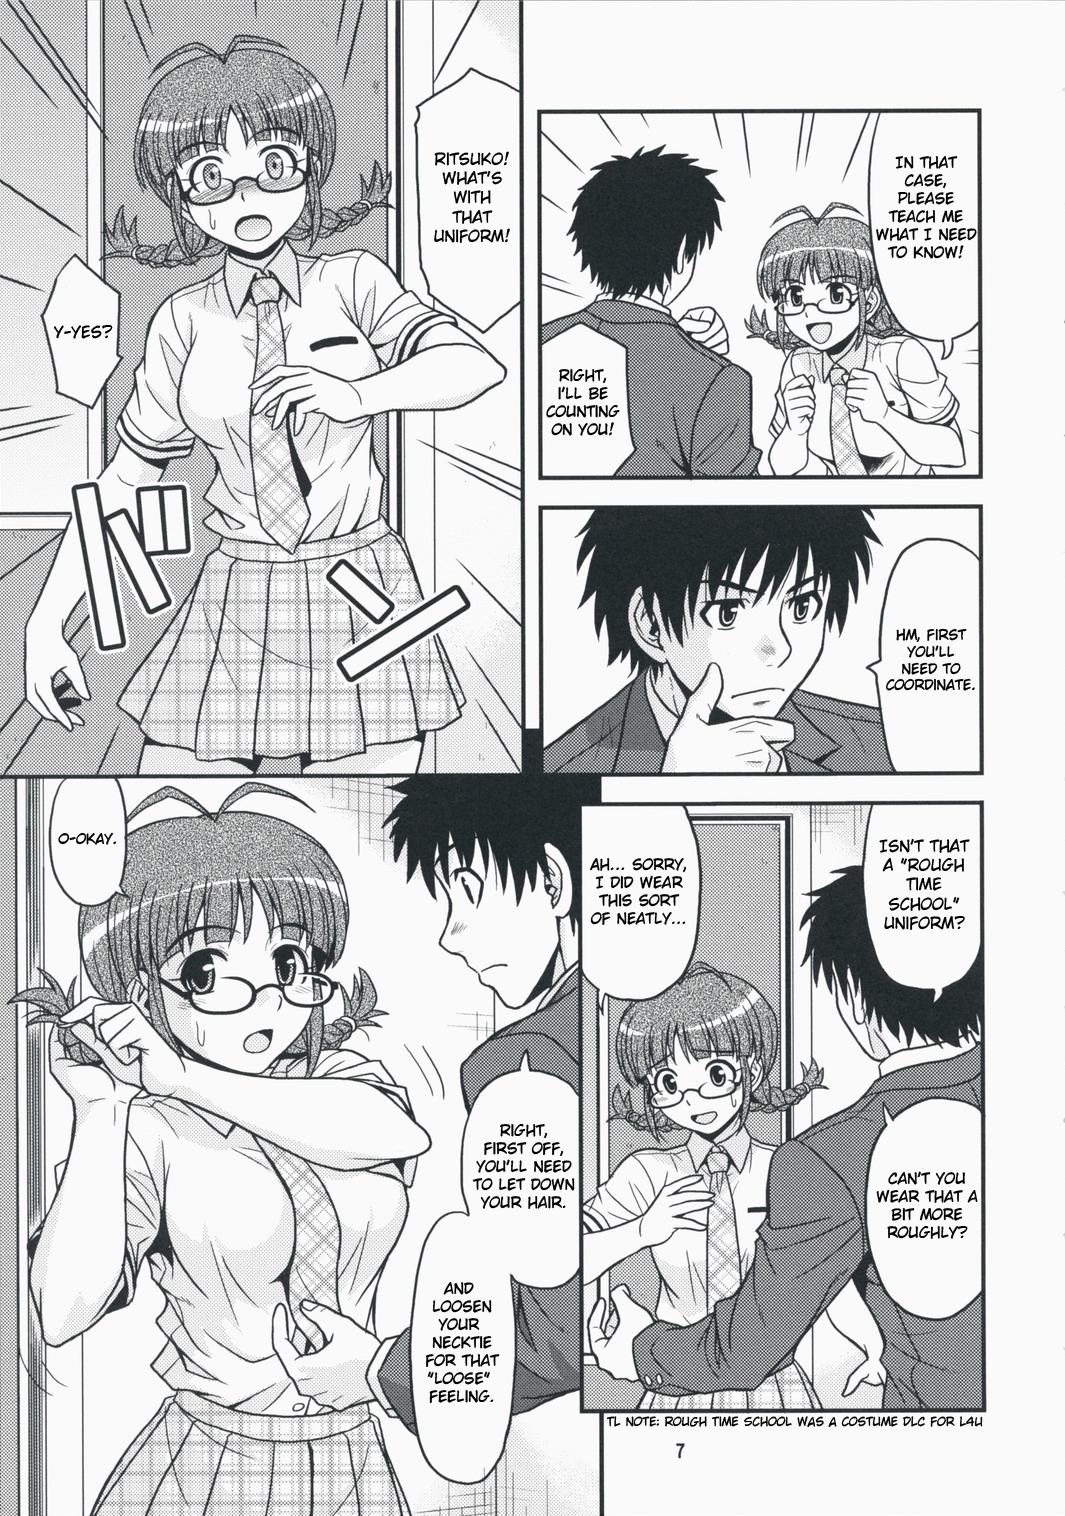 Amature Sex Limited for You! - The idolmaster Teenager - Page 6